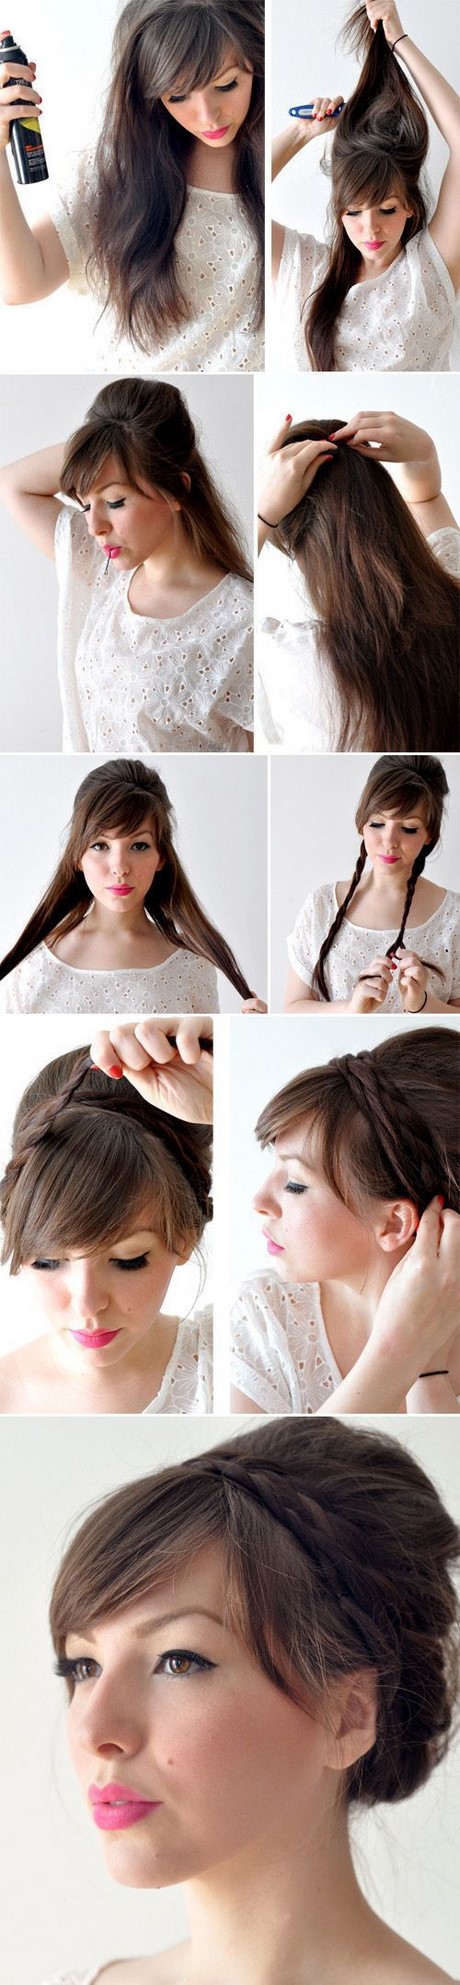 hairstyles-at-home-for-long-hair-00_13 Hairstyles at home for long hair